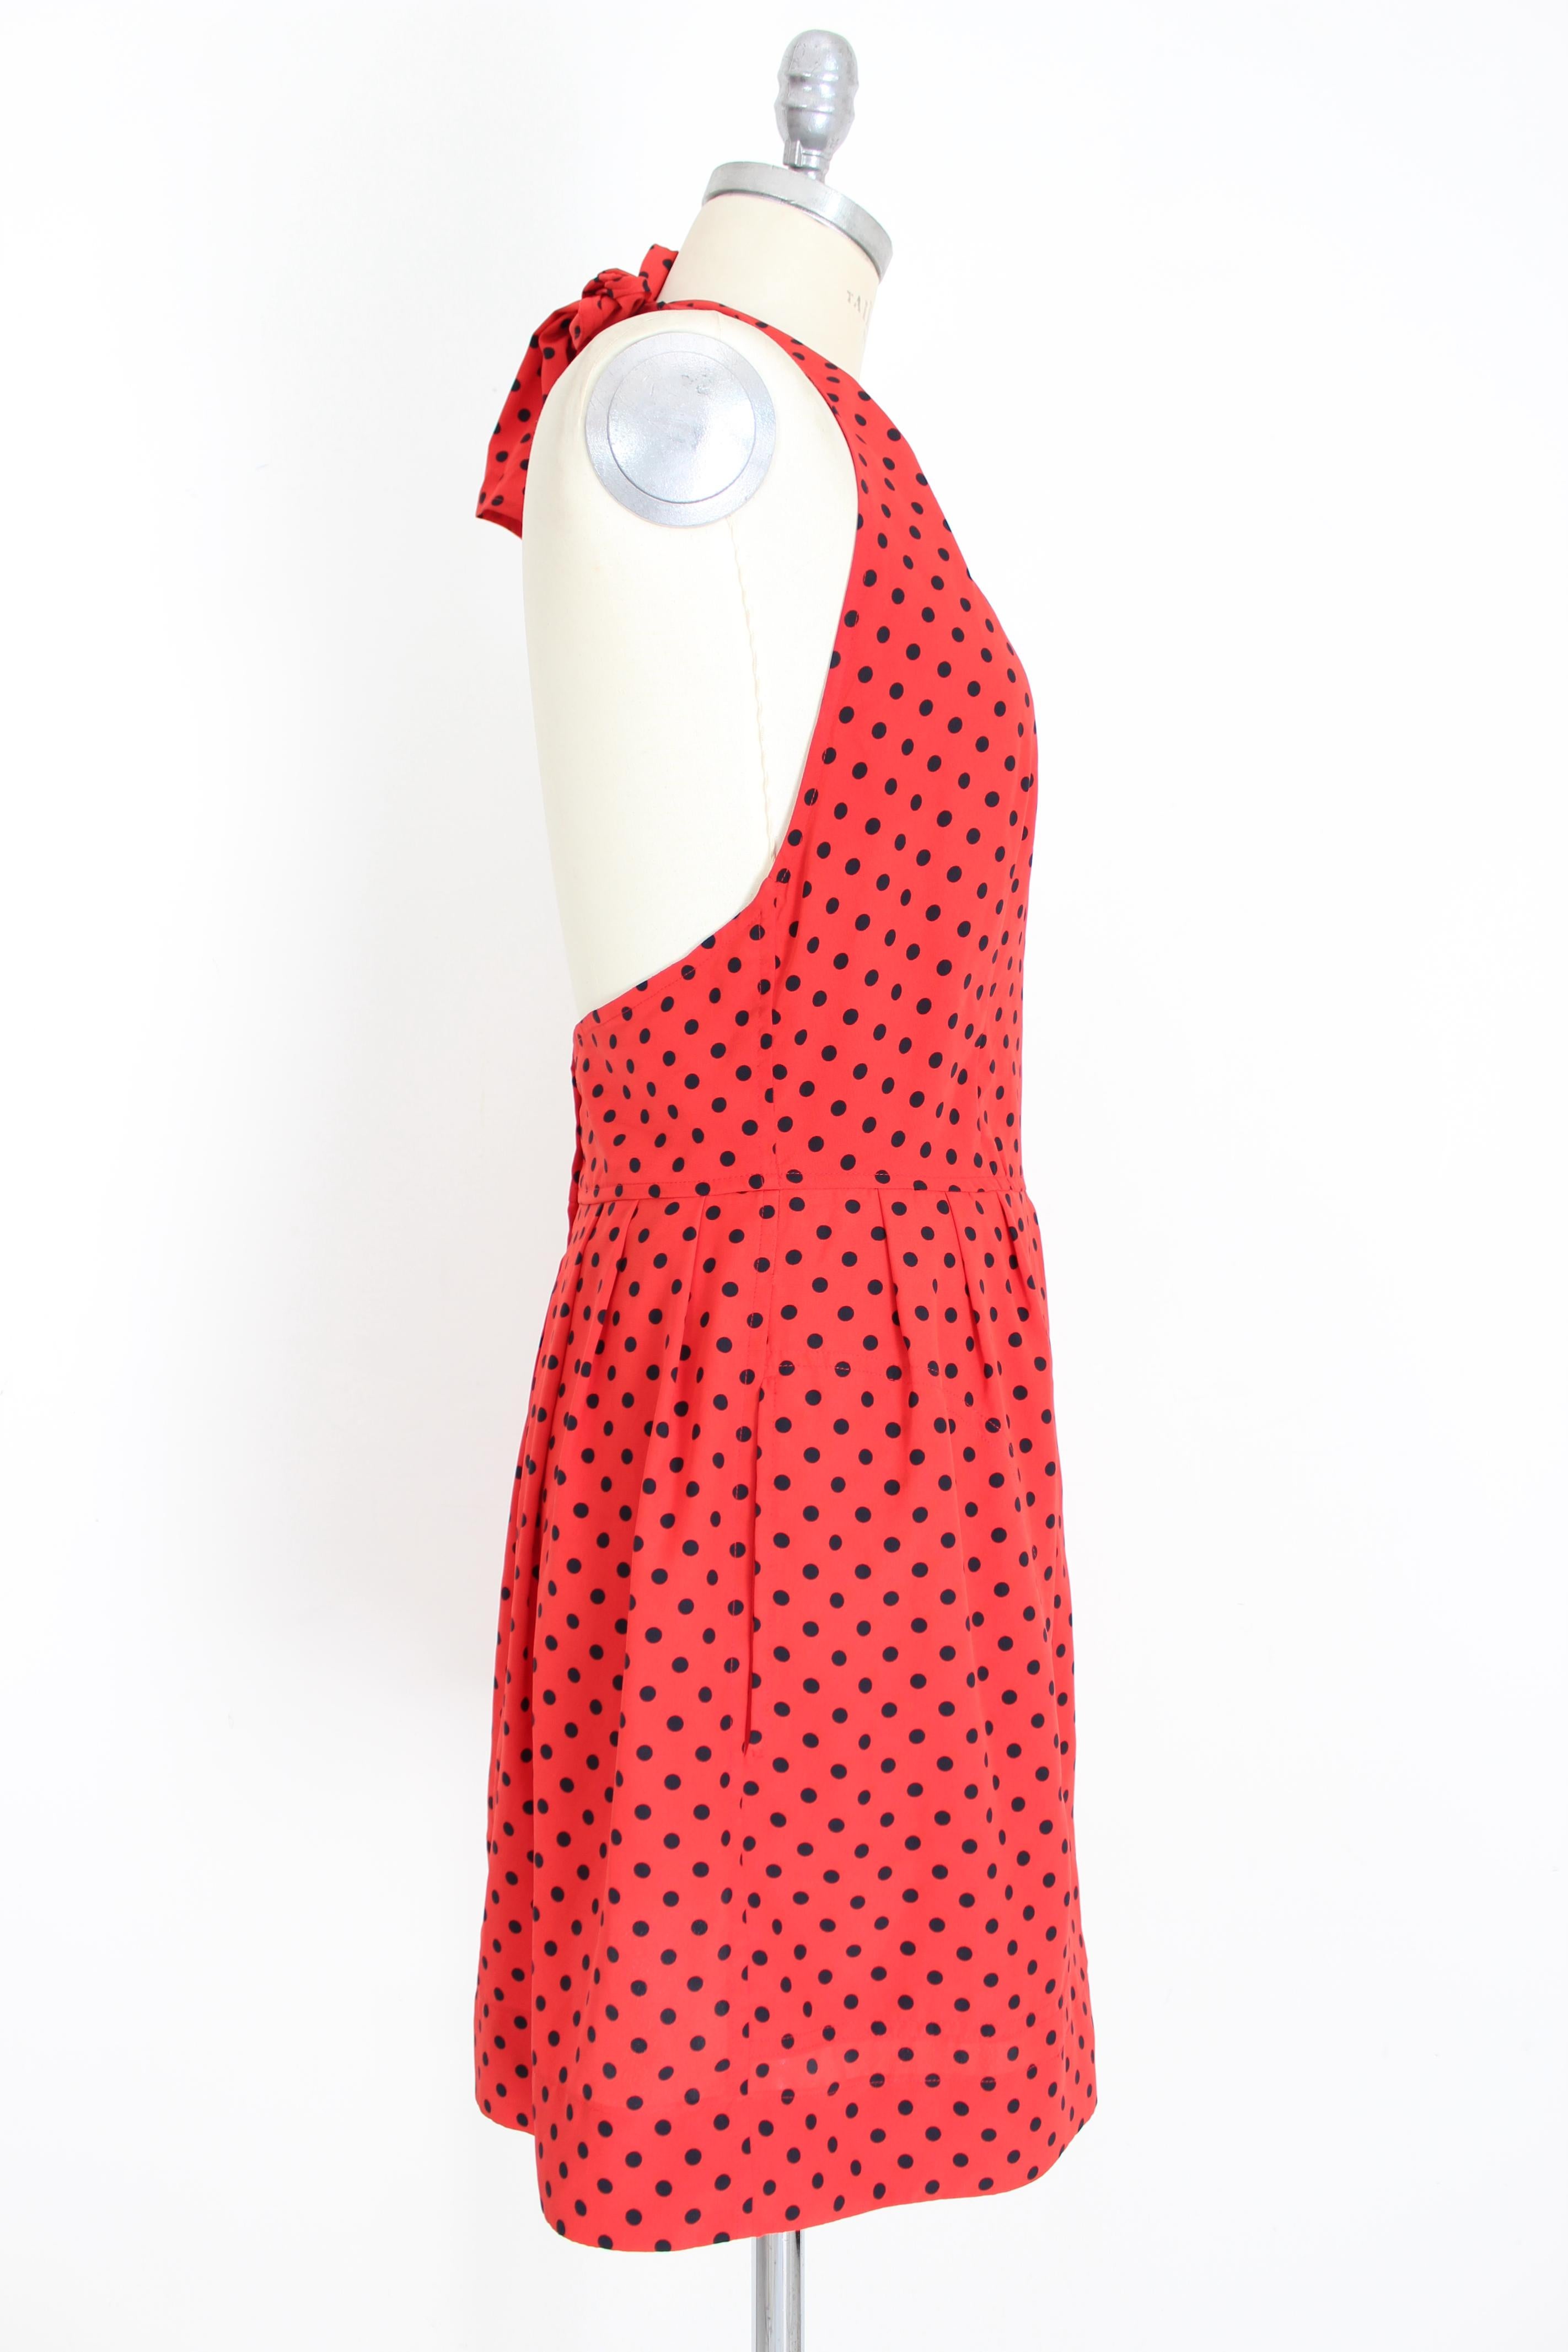 Moschino Red Black Polka Dot Cocktail Jacket and Dress Set 1990s Vintage 3